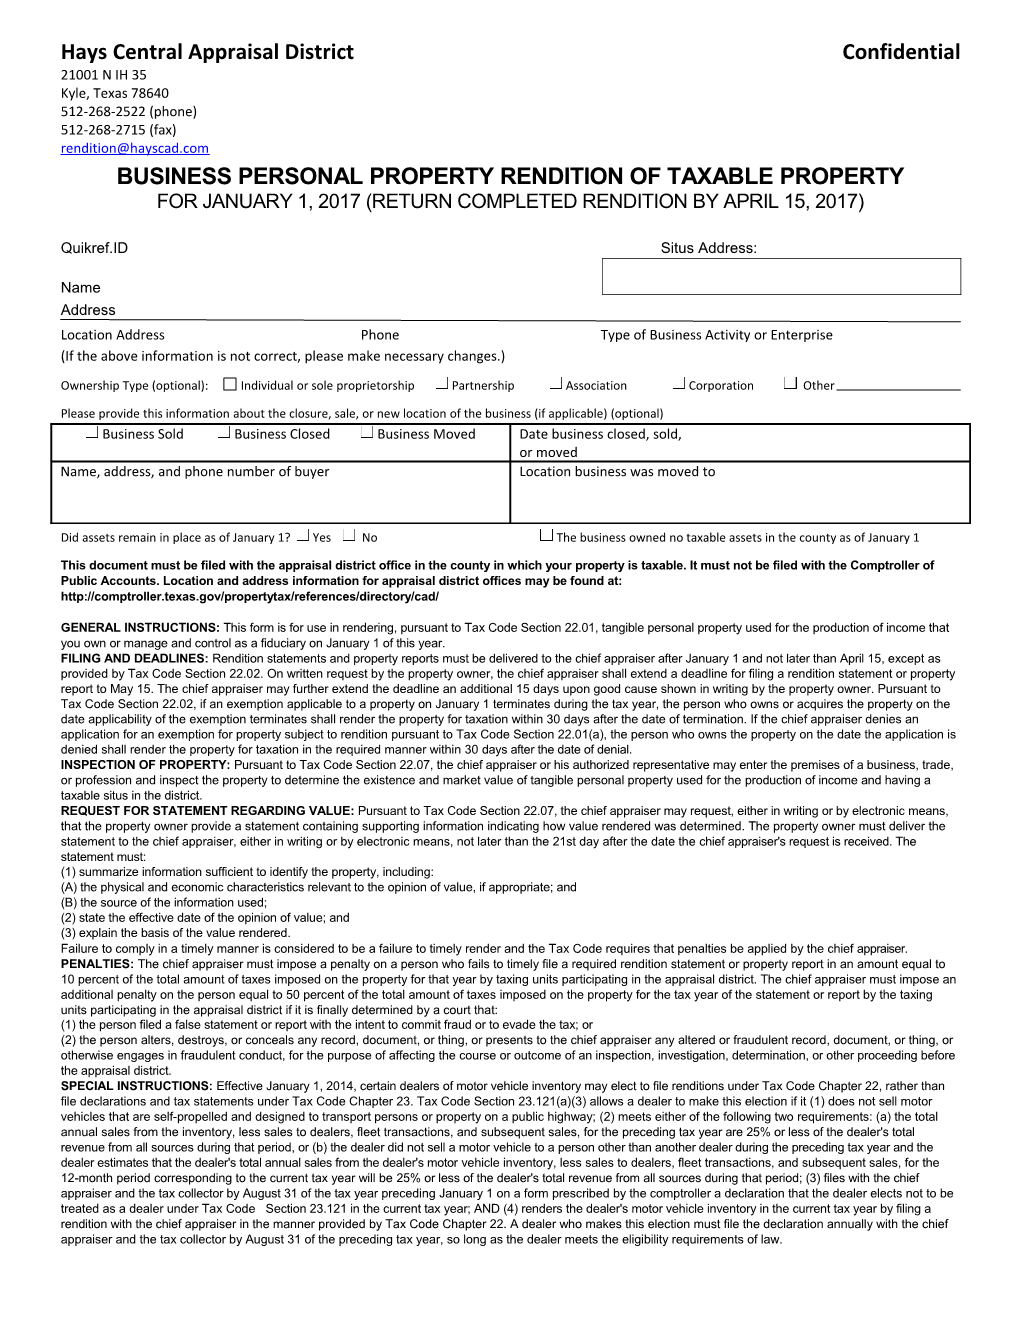 Business Personal Property Rendition of Taxable Property